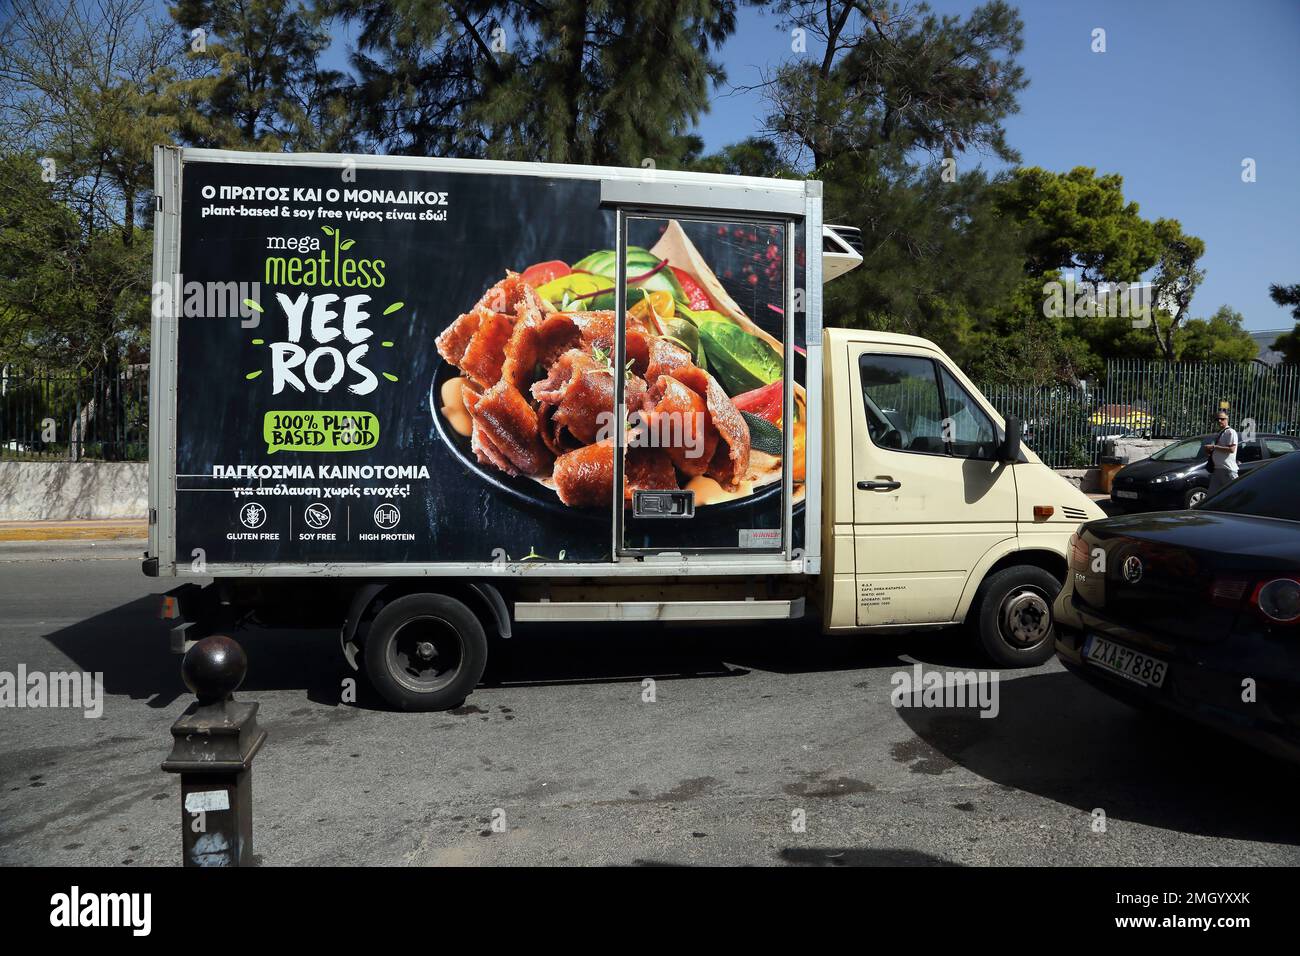 Delivery Van for Yee Ros Plant Based Food for Vegans Vouliagmeni Attica  Greece Stock Photo - Alamy